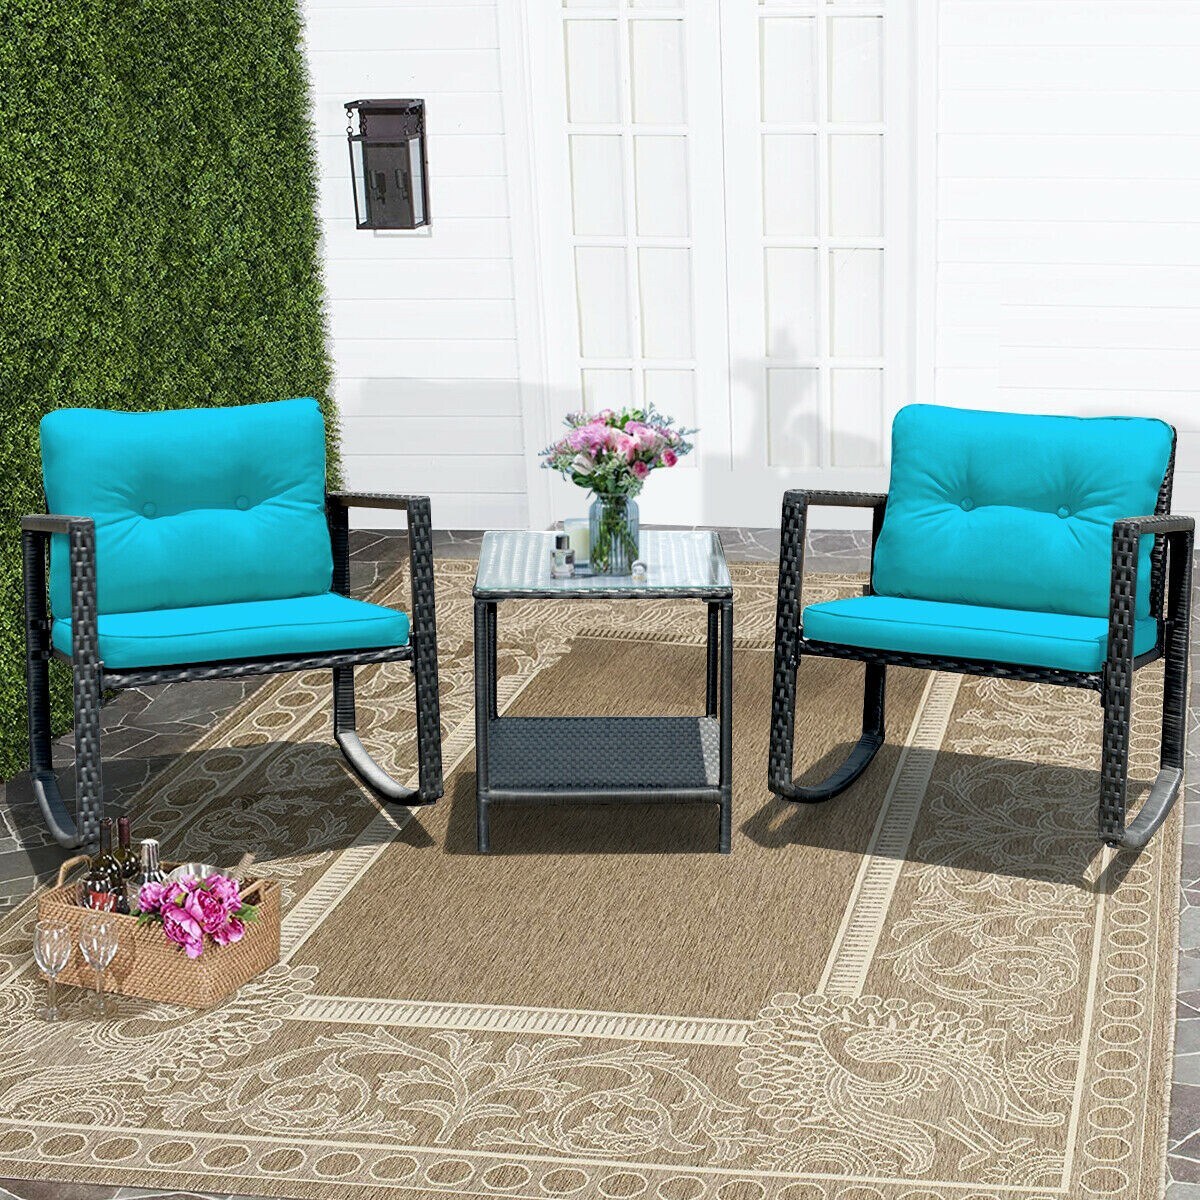 Blue Cushion 3 Piece Steel Rocking Patio Furniture Set Modern Outdoor Wicker Conversation Chair Sets with Soft Cushion and Coffee Table